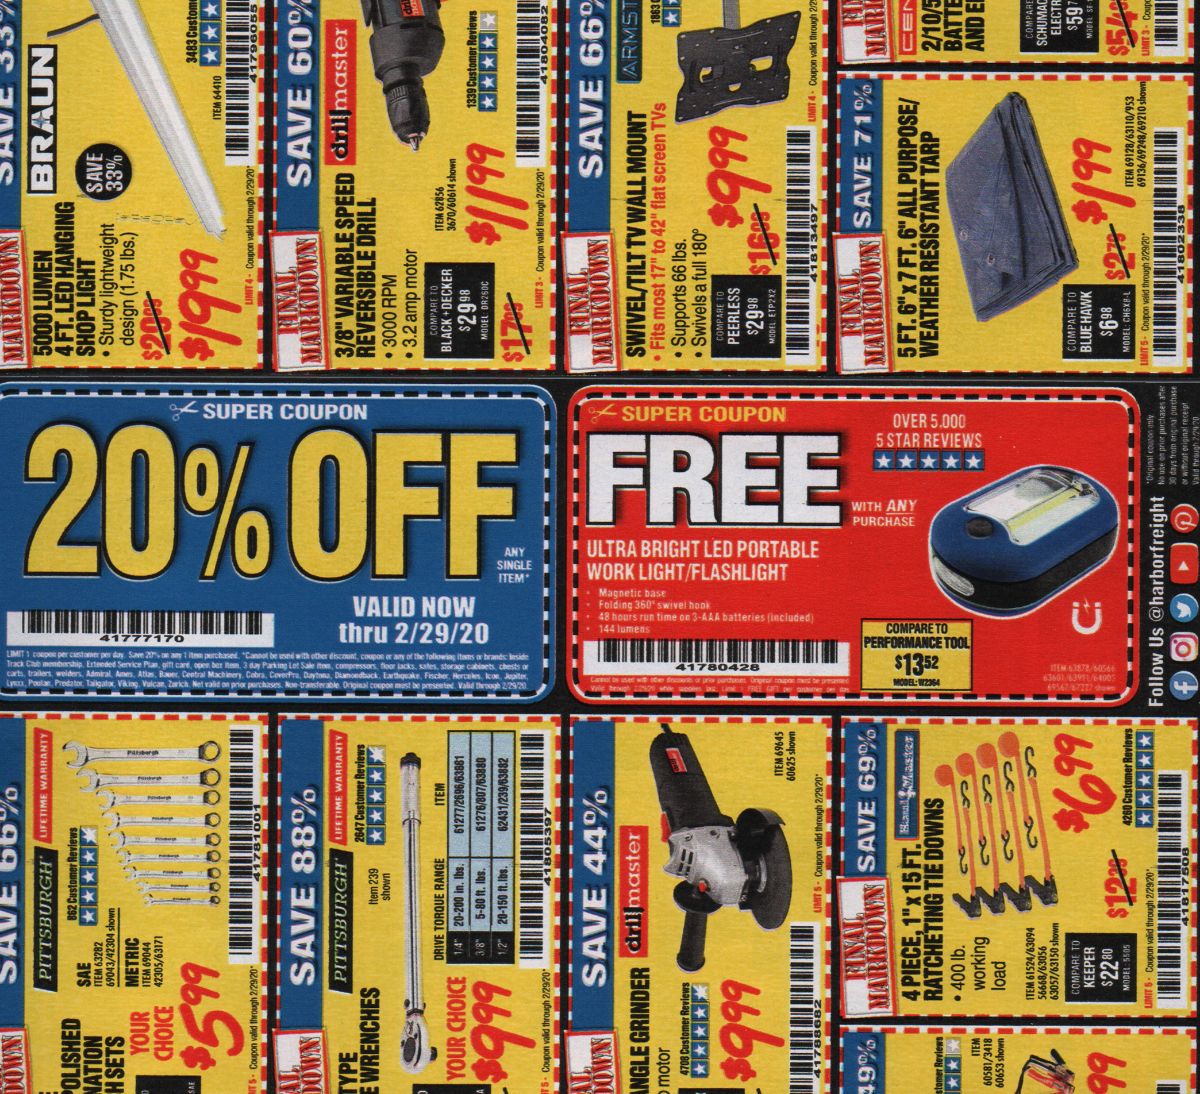 Can You use Multiple Harbor Freight Coupons at Once?